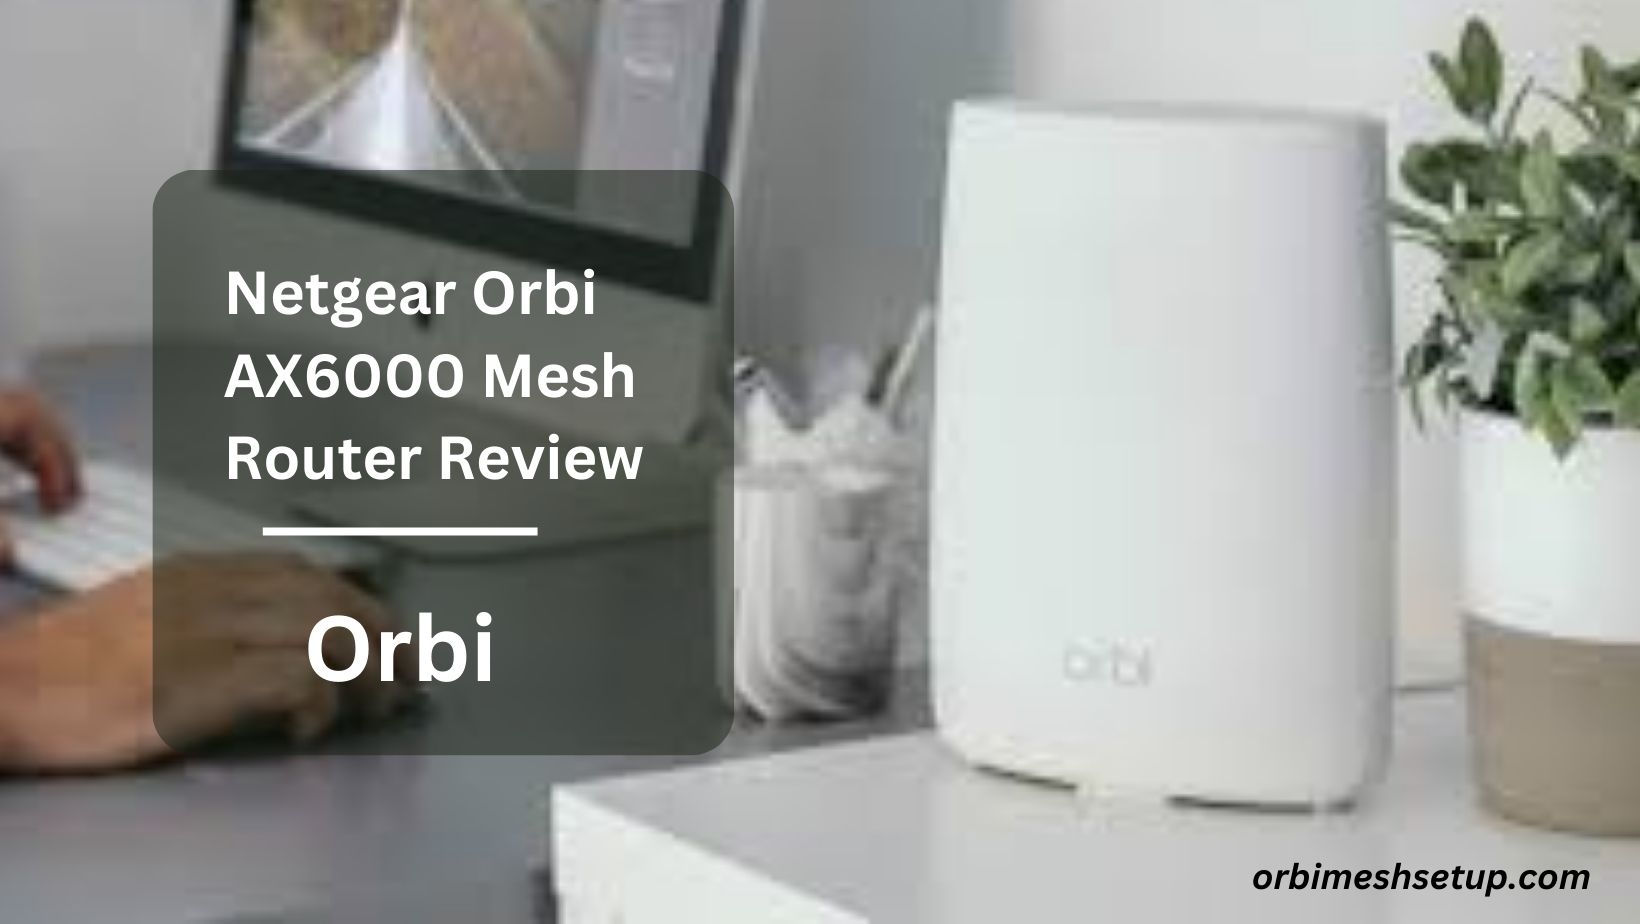 You are currently viewing Netgear Orbi AX6000 Mesh Router Review